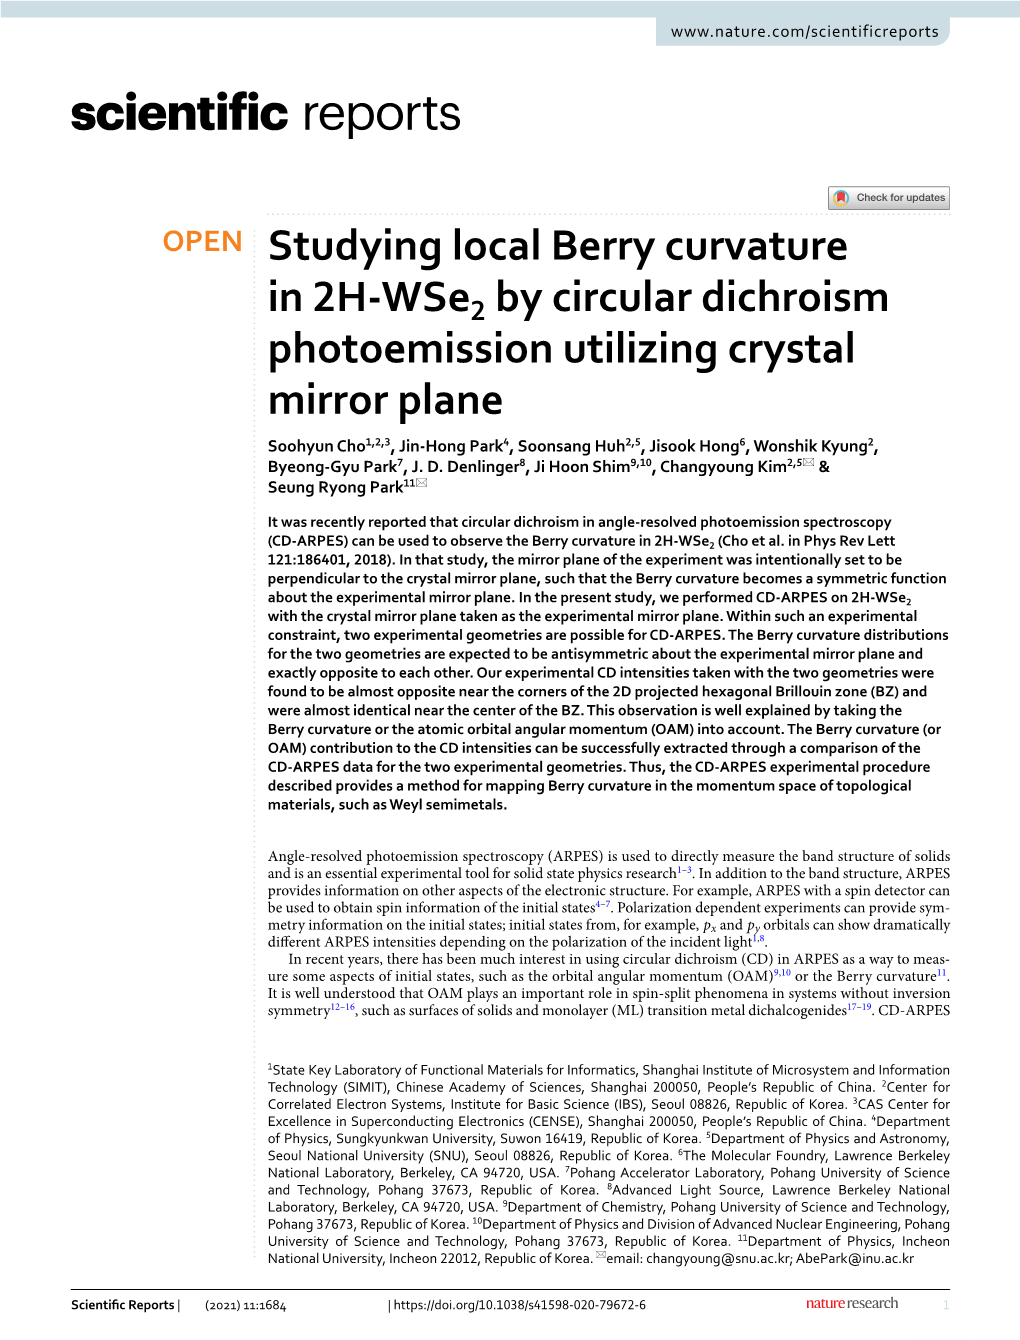 Studying Local Berry Curvature in 2H-Wse2 by Circular Dichroism Photoemission Utilizing Crystal Mirror Plane